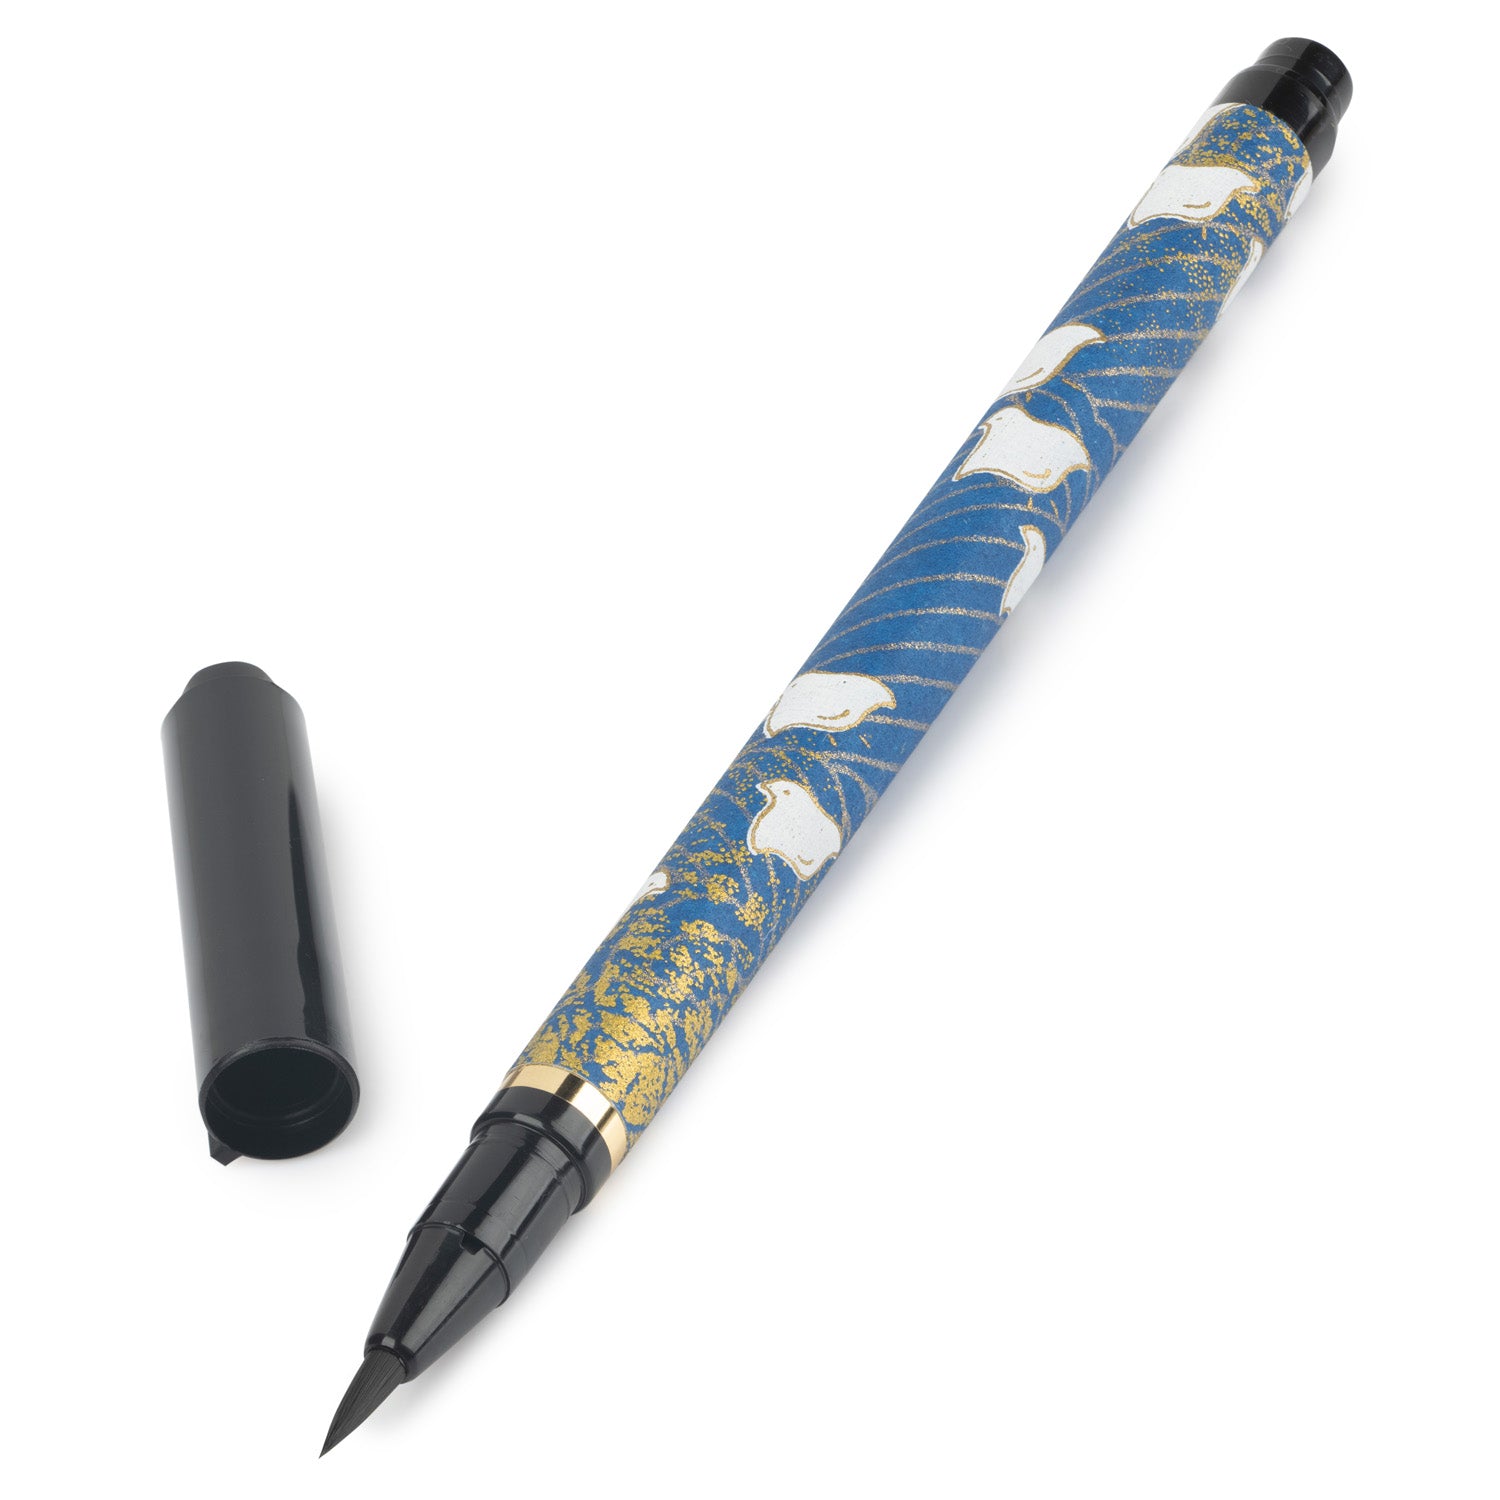 Blue Koto Japanese Calligraphy Brush Pen and top